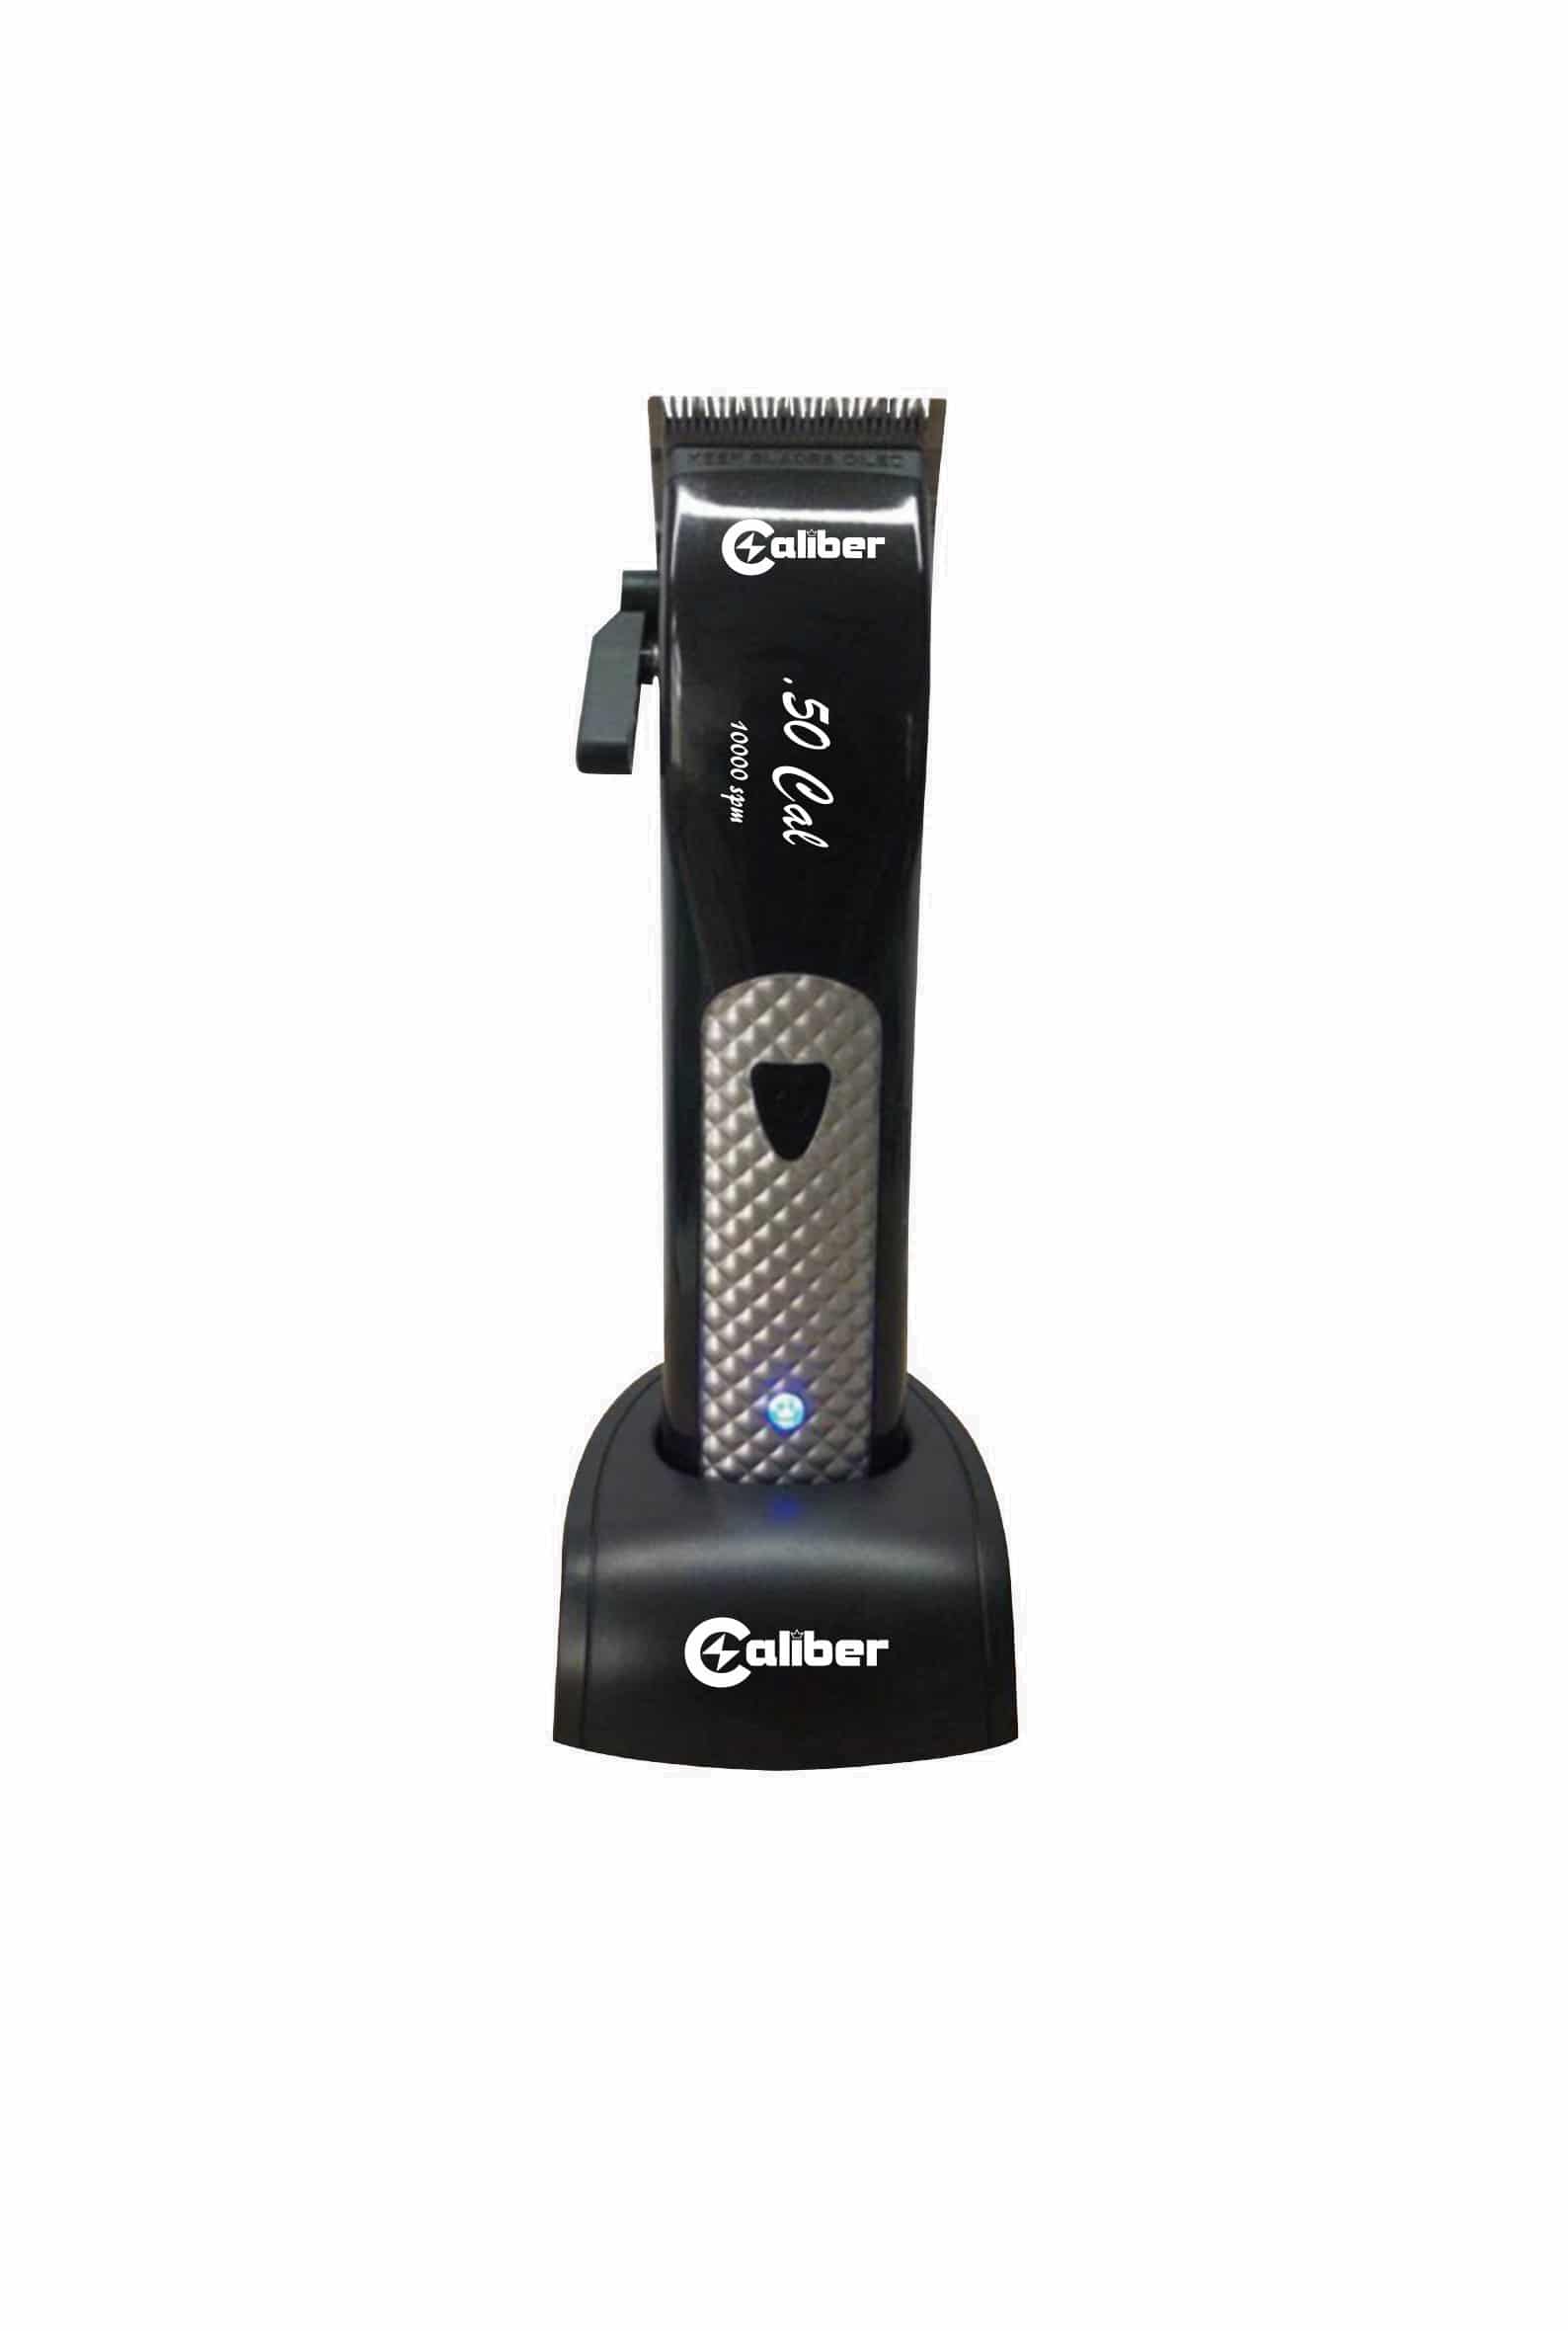 caliber pro clippers